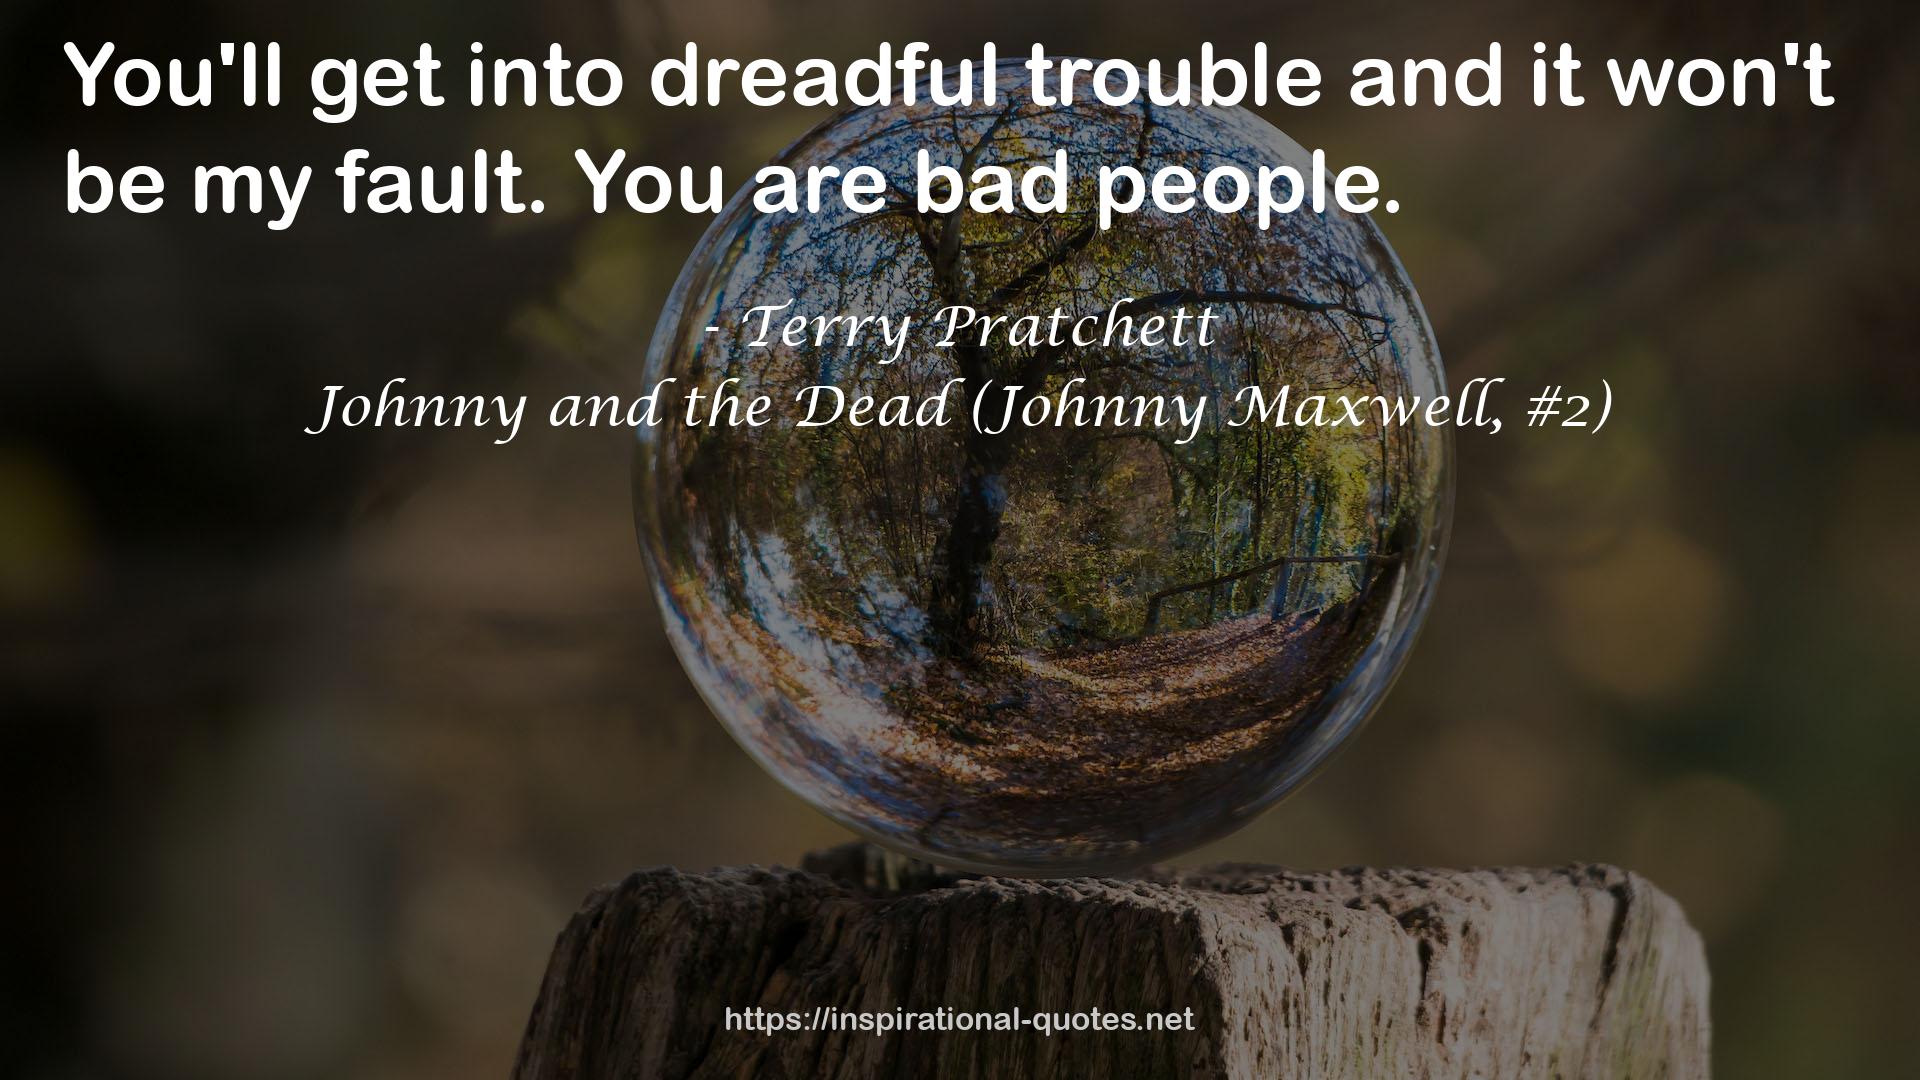 dreadful trouble  QUOTES